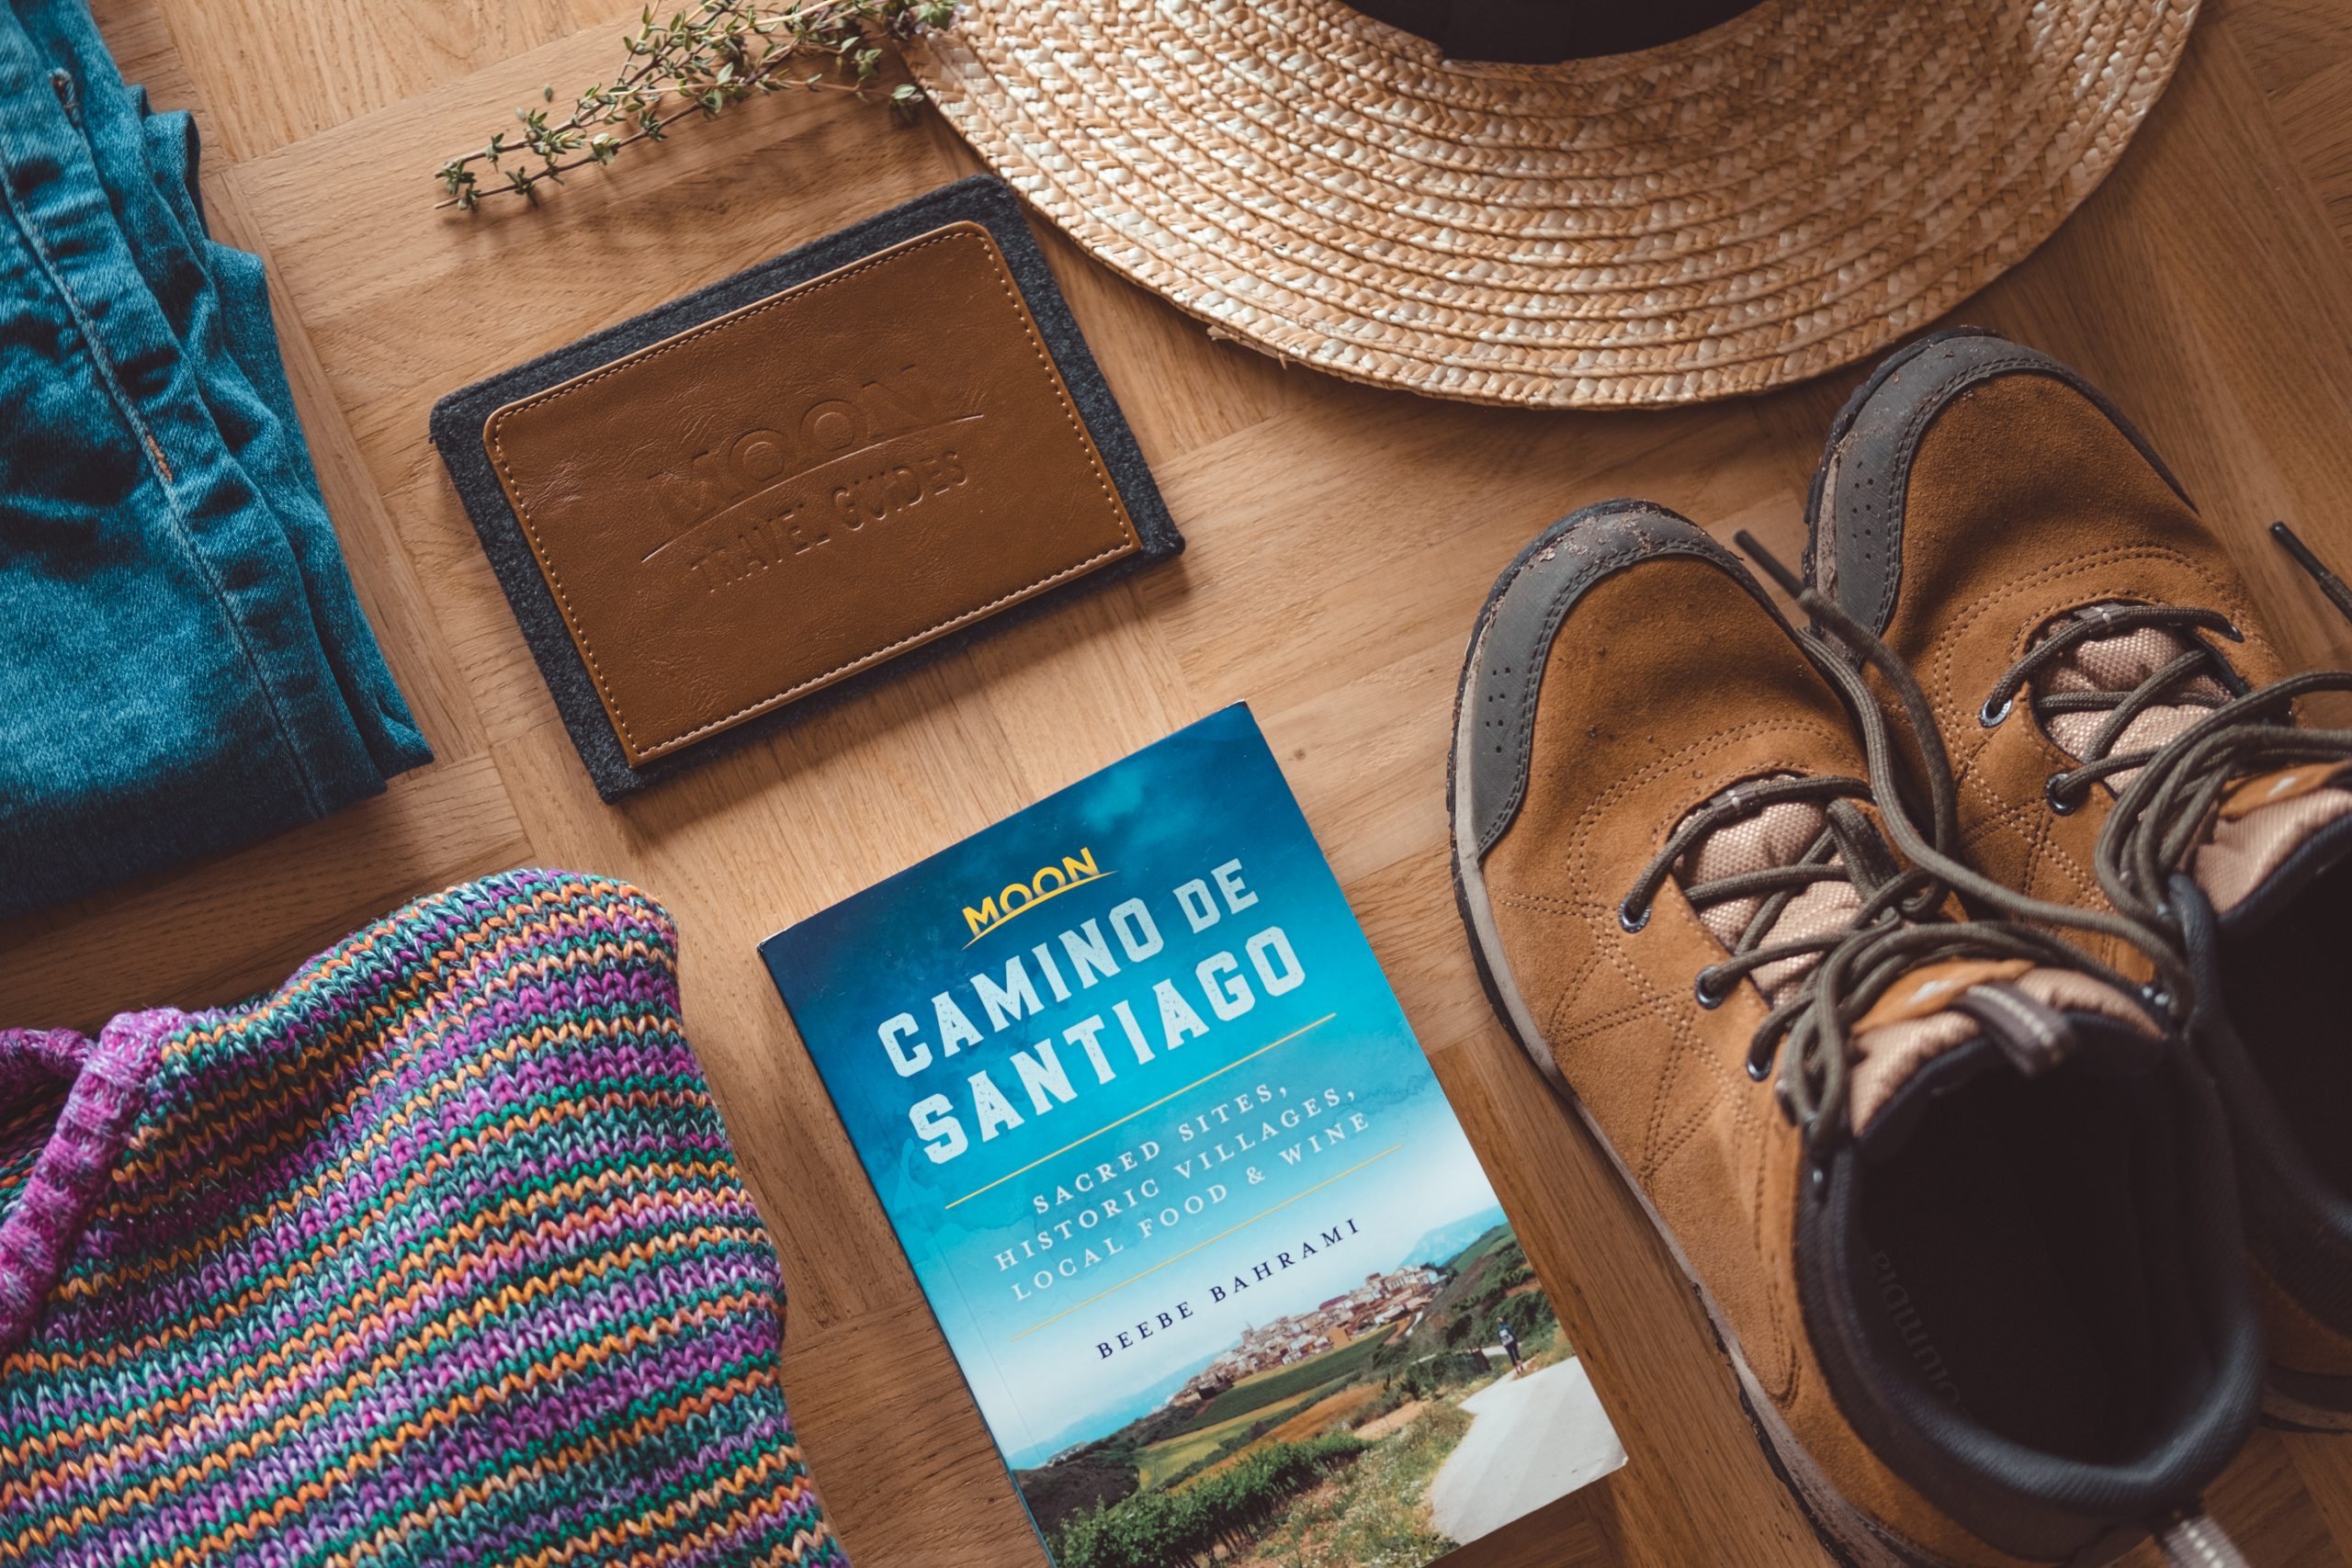 Preparing for a hike on Camino de Santiago with Moon Travel Guide